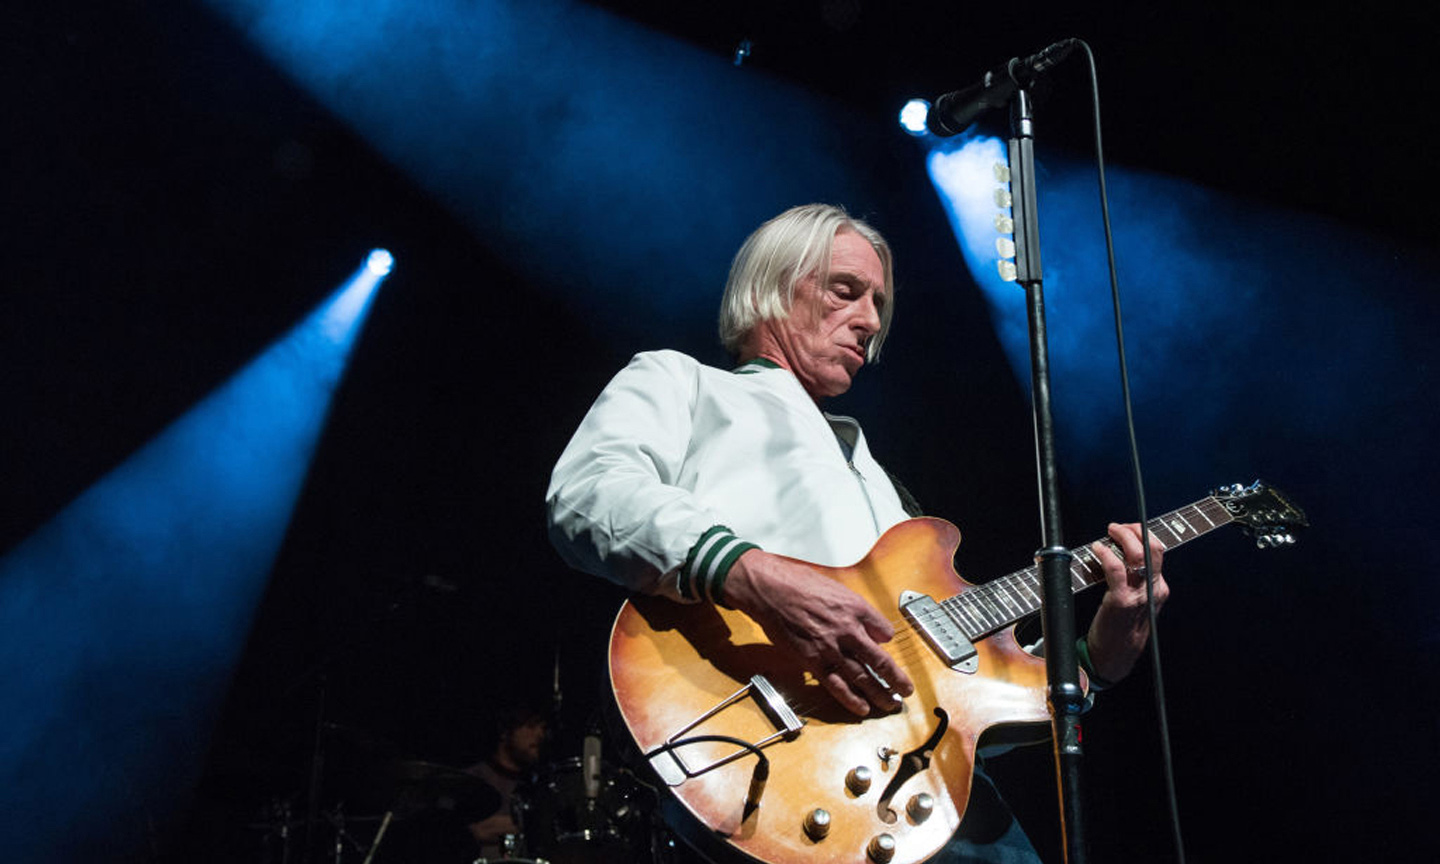 Paul Weller Adds Major UK Outdoor Shows To 2022 Live Itinerary